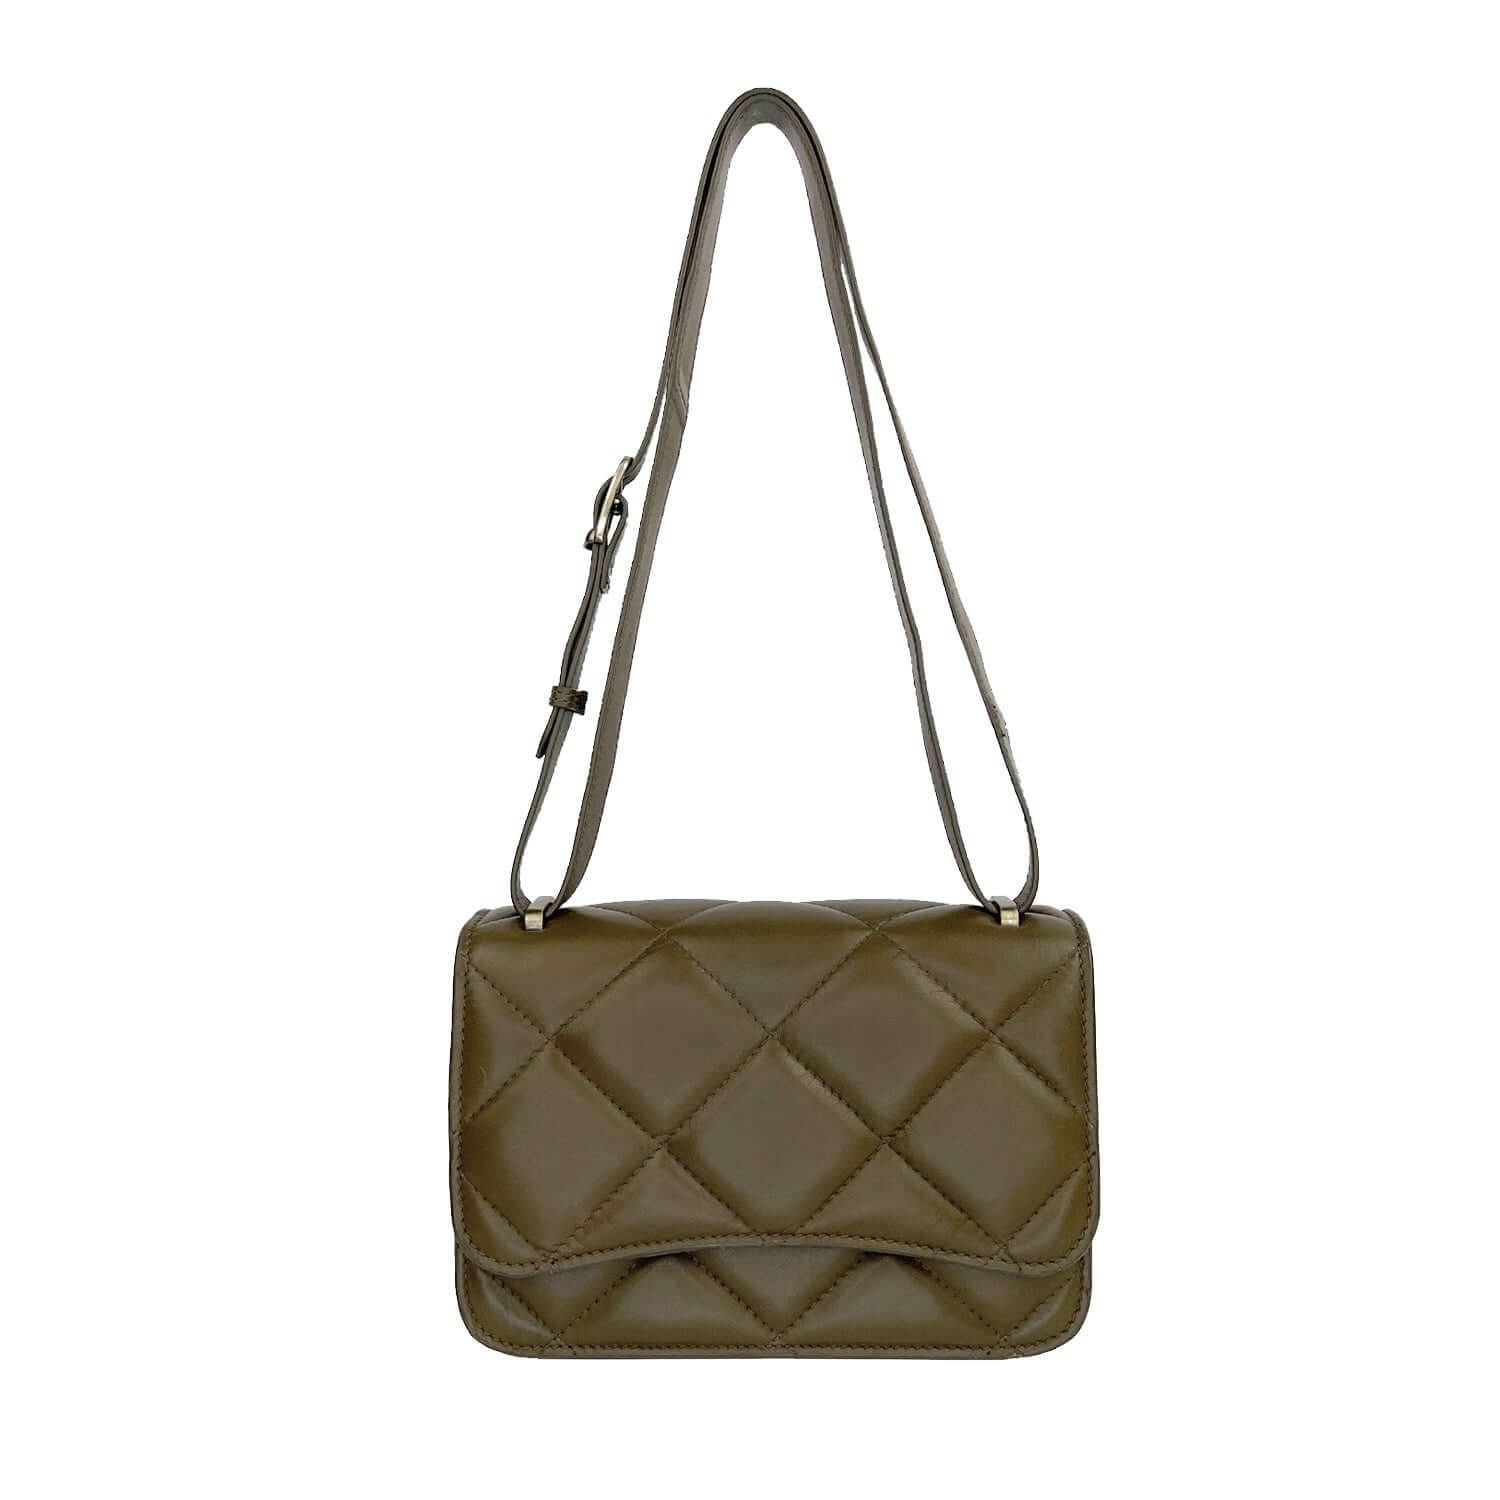 Asta diamond quilted compartment shoulder bag in olive green chrome-free sheep leather.